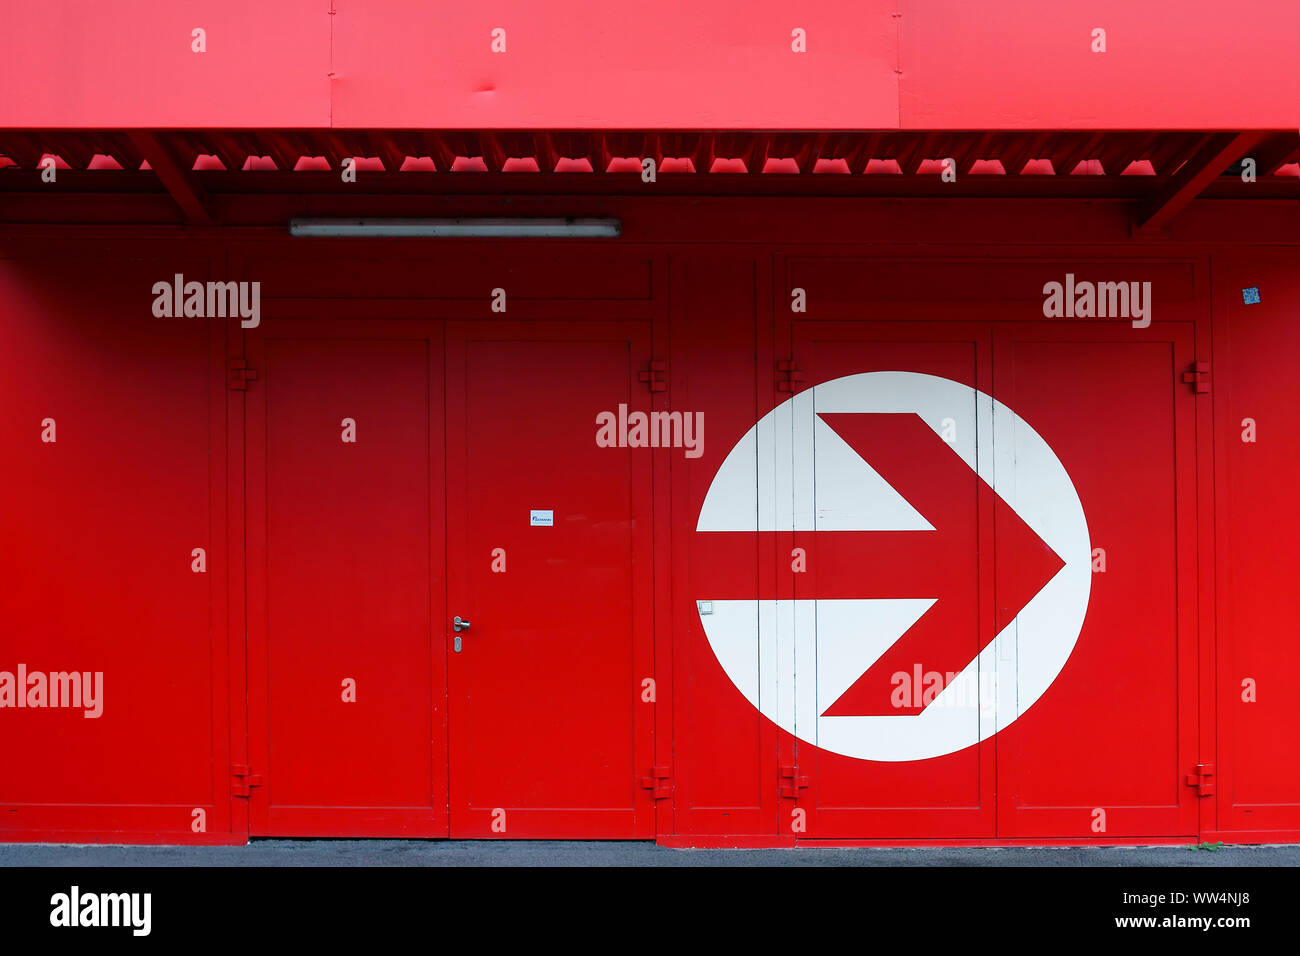 A rectangular red entrance sign with white writing on a vibrant red metal facade, Stock Photo